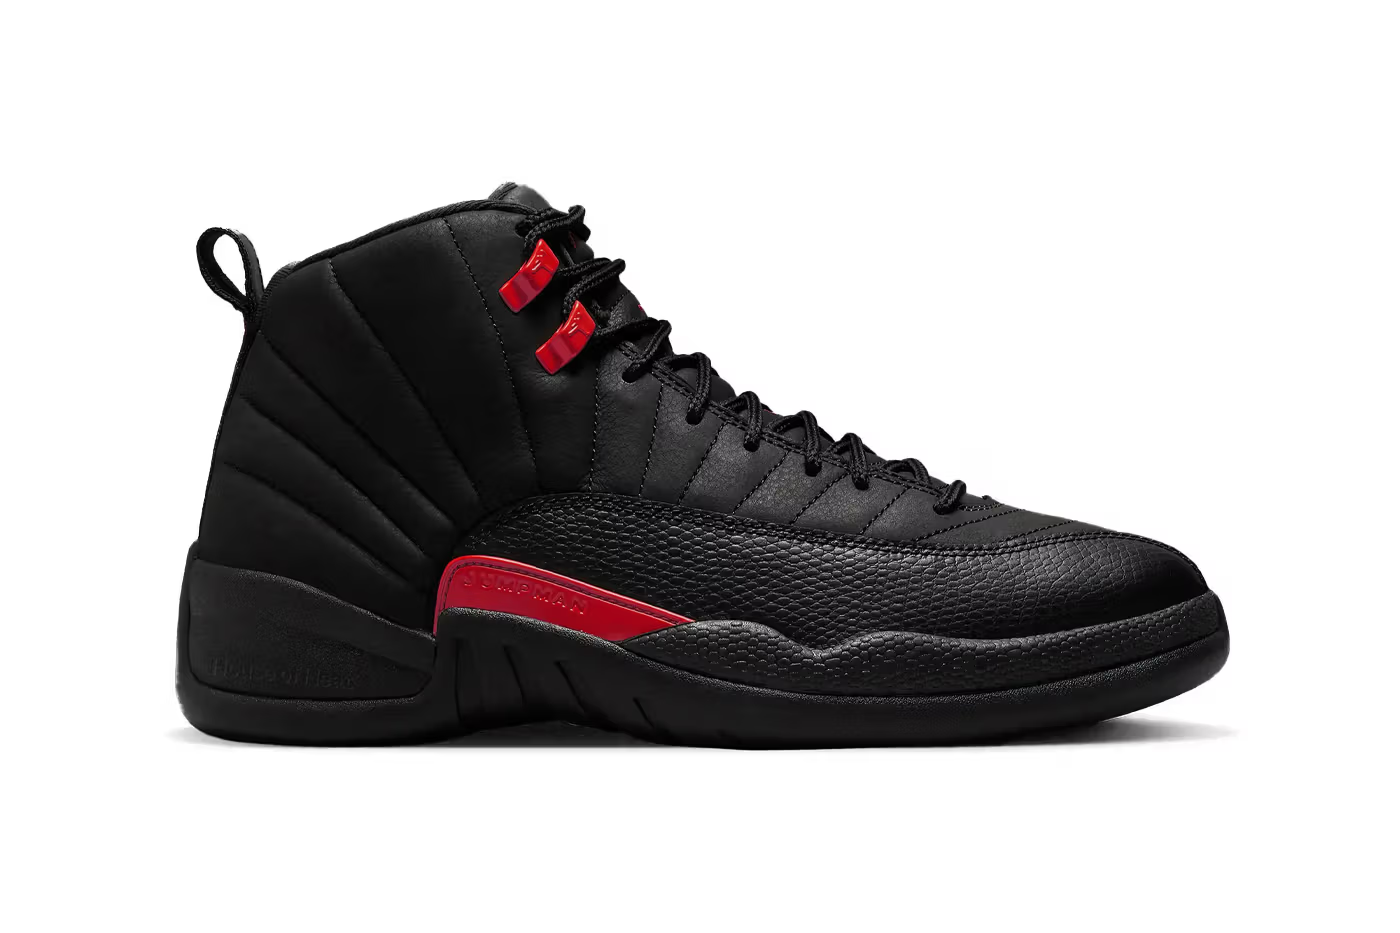 Air Jordan fans, rejoice! The "Flu Game" release might be on hold, but a new colorway emerges. The Air Jordan 12 "Bloodline" boasts a black base with red accents, premium materials & a January 2025 release for $200 USD via Nike & retailers.